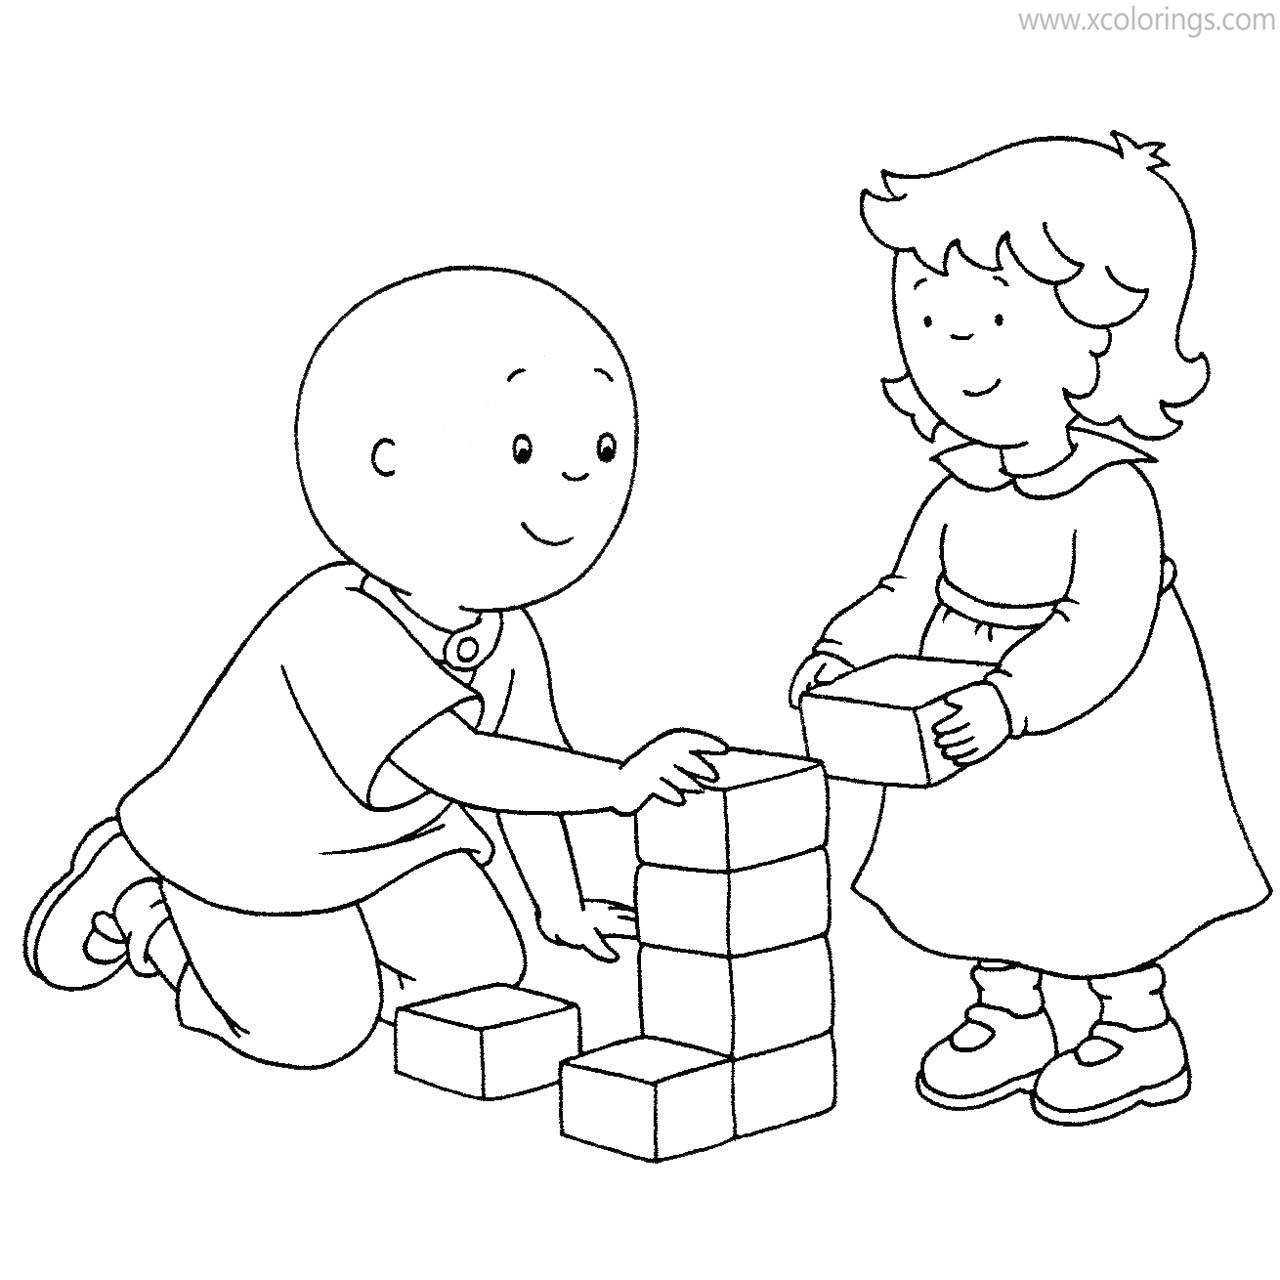 Free Caillou Coloring Pages Playing Building Blocks with Rosie printable